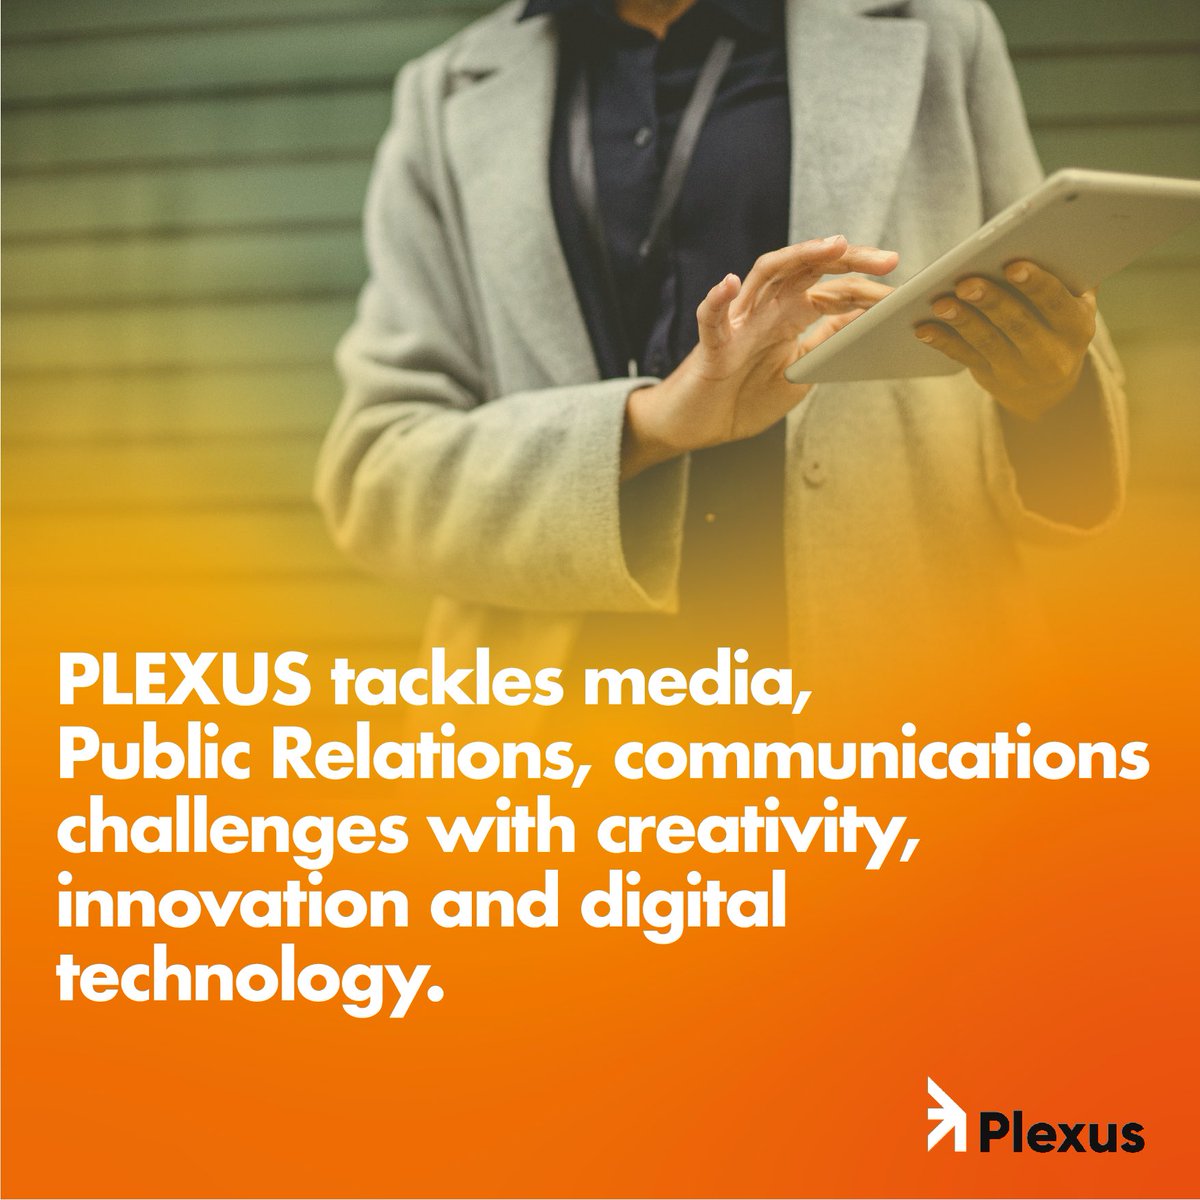 PLEXUS tackles media, Public Relations, communications challenges with creativity, innovation and digital technology.

Contact PLEXUS today for a quote.

#gistlover #mediabuying #PR